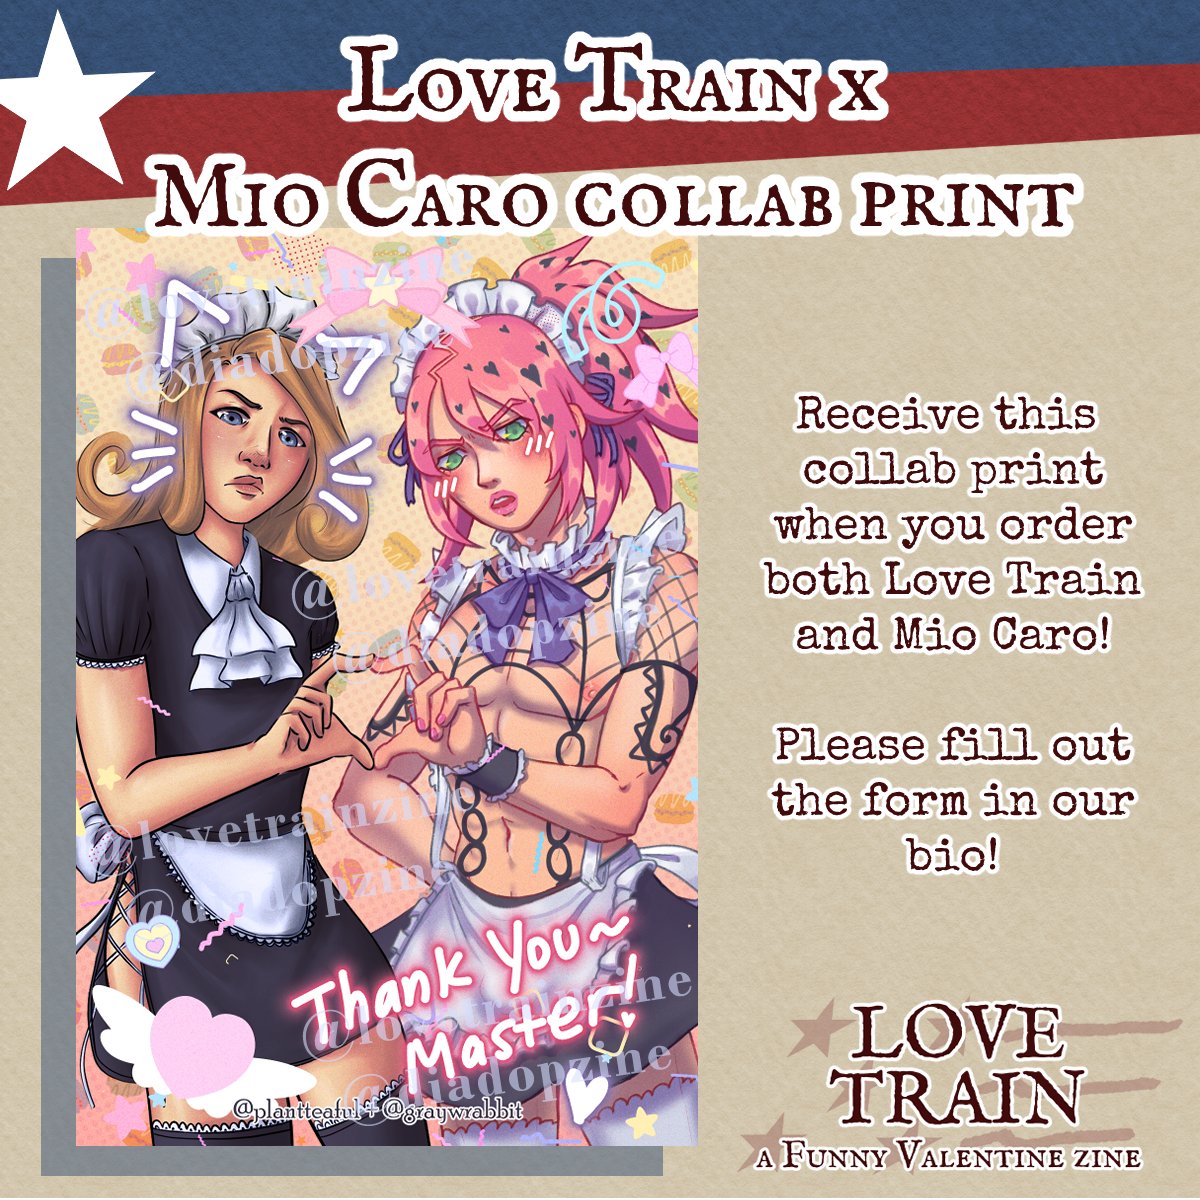 It's finally time to show of the exclusive print from our collaboration with @lovetrainzine! Shop: miocaro.bigcartel.com The form to get the print: docs.google.com/forms/d/e/1FAI… Print made by @plantteaful and @graywrabbit